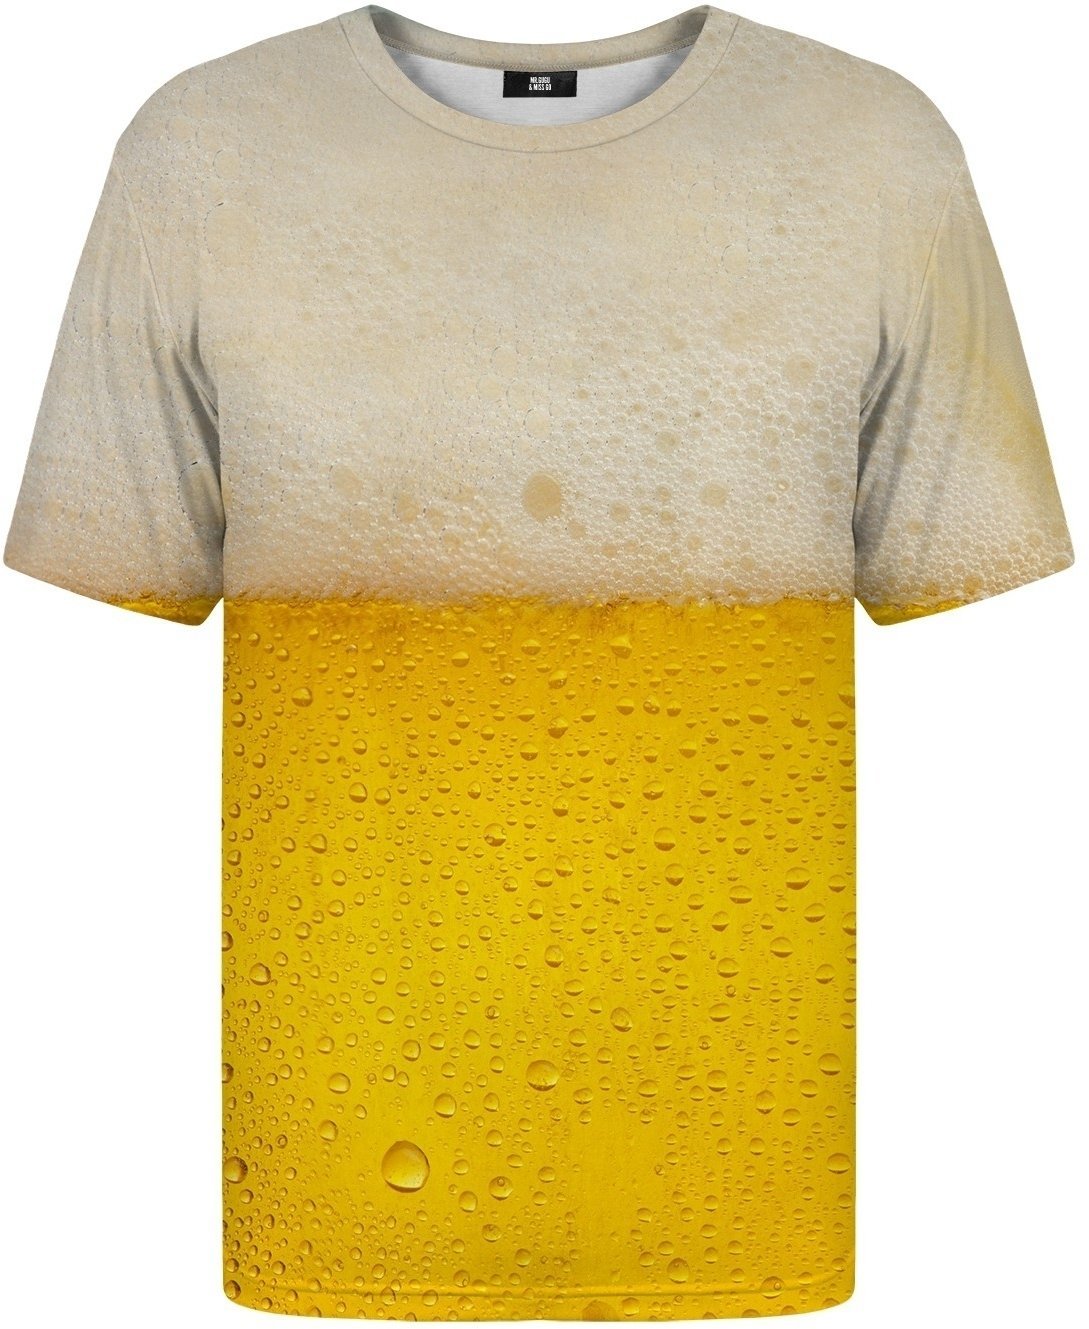 Shirt Mr. Gugu and Miss Go Shirt Beer S